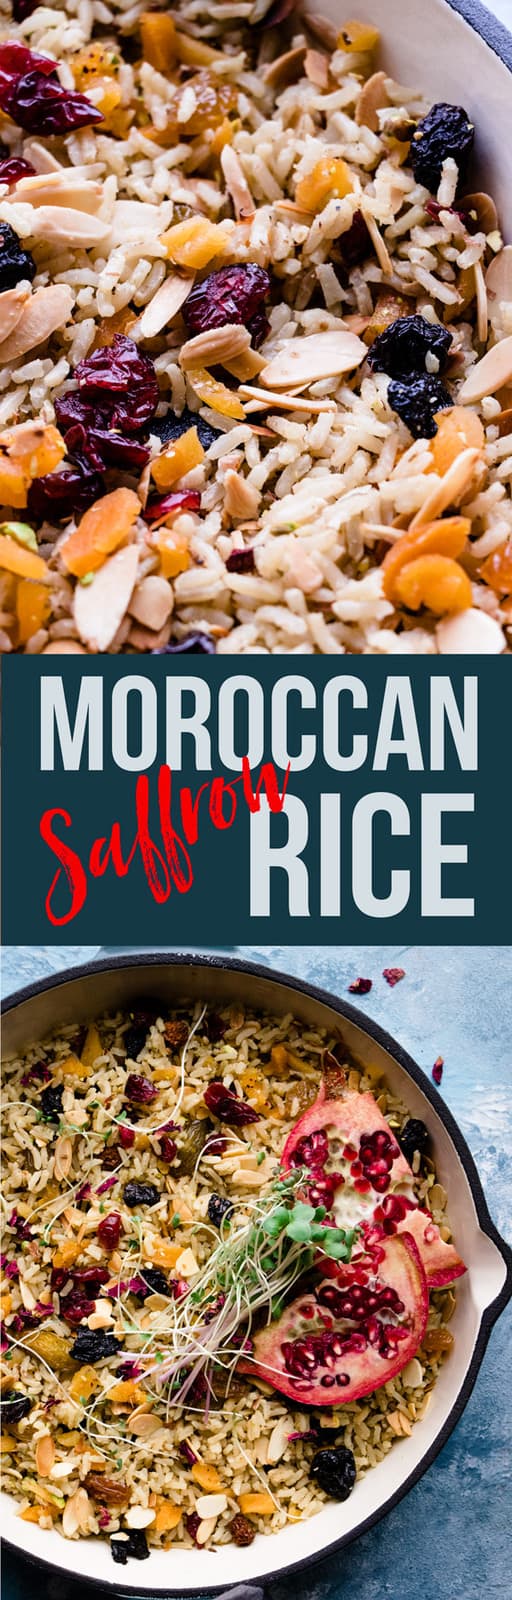 Moroccan rice pilaf with almonds.